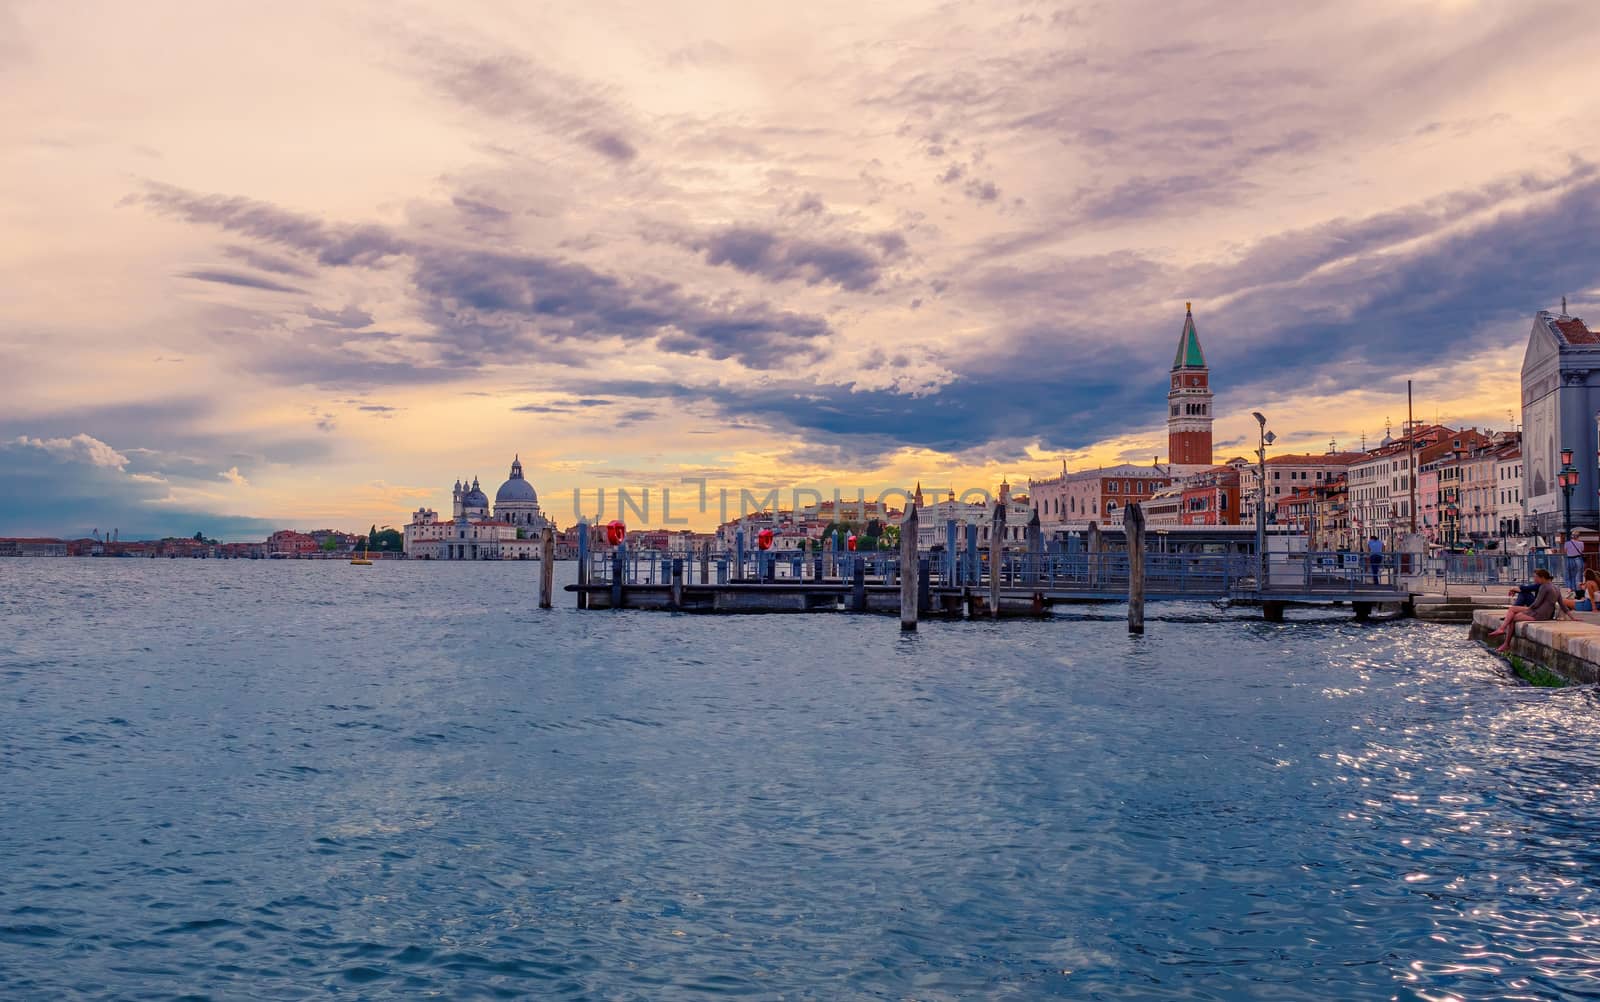 St. Mark's campanile in Venice with dramatic sky - Italy by COffe